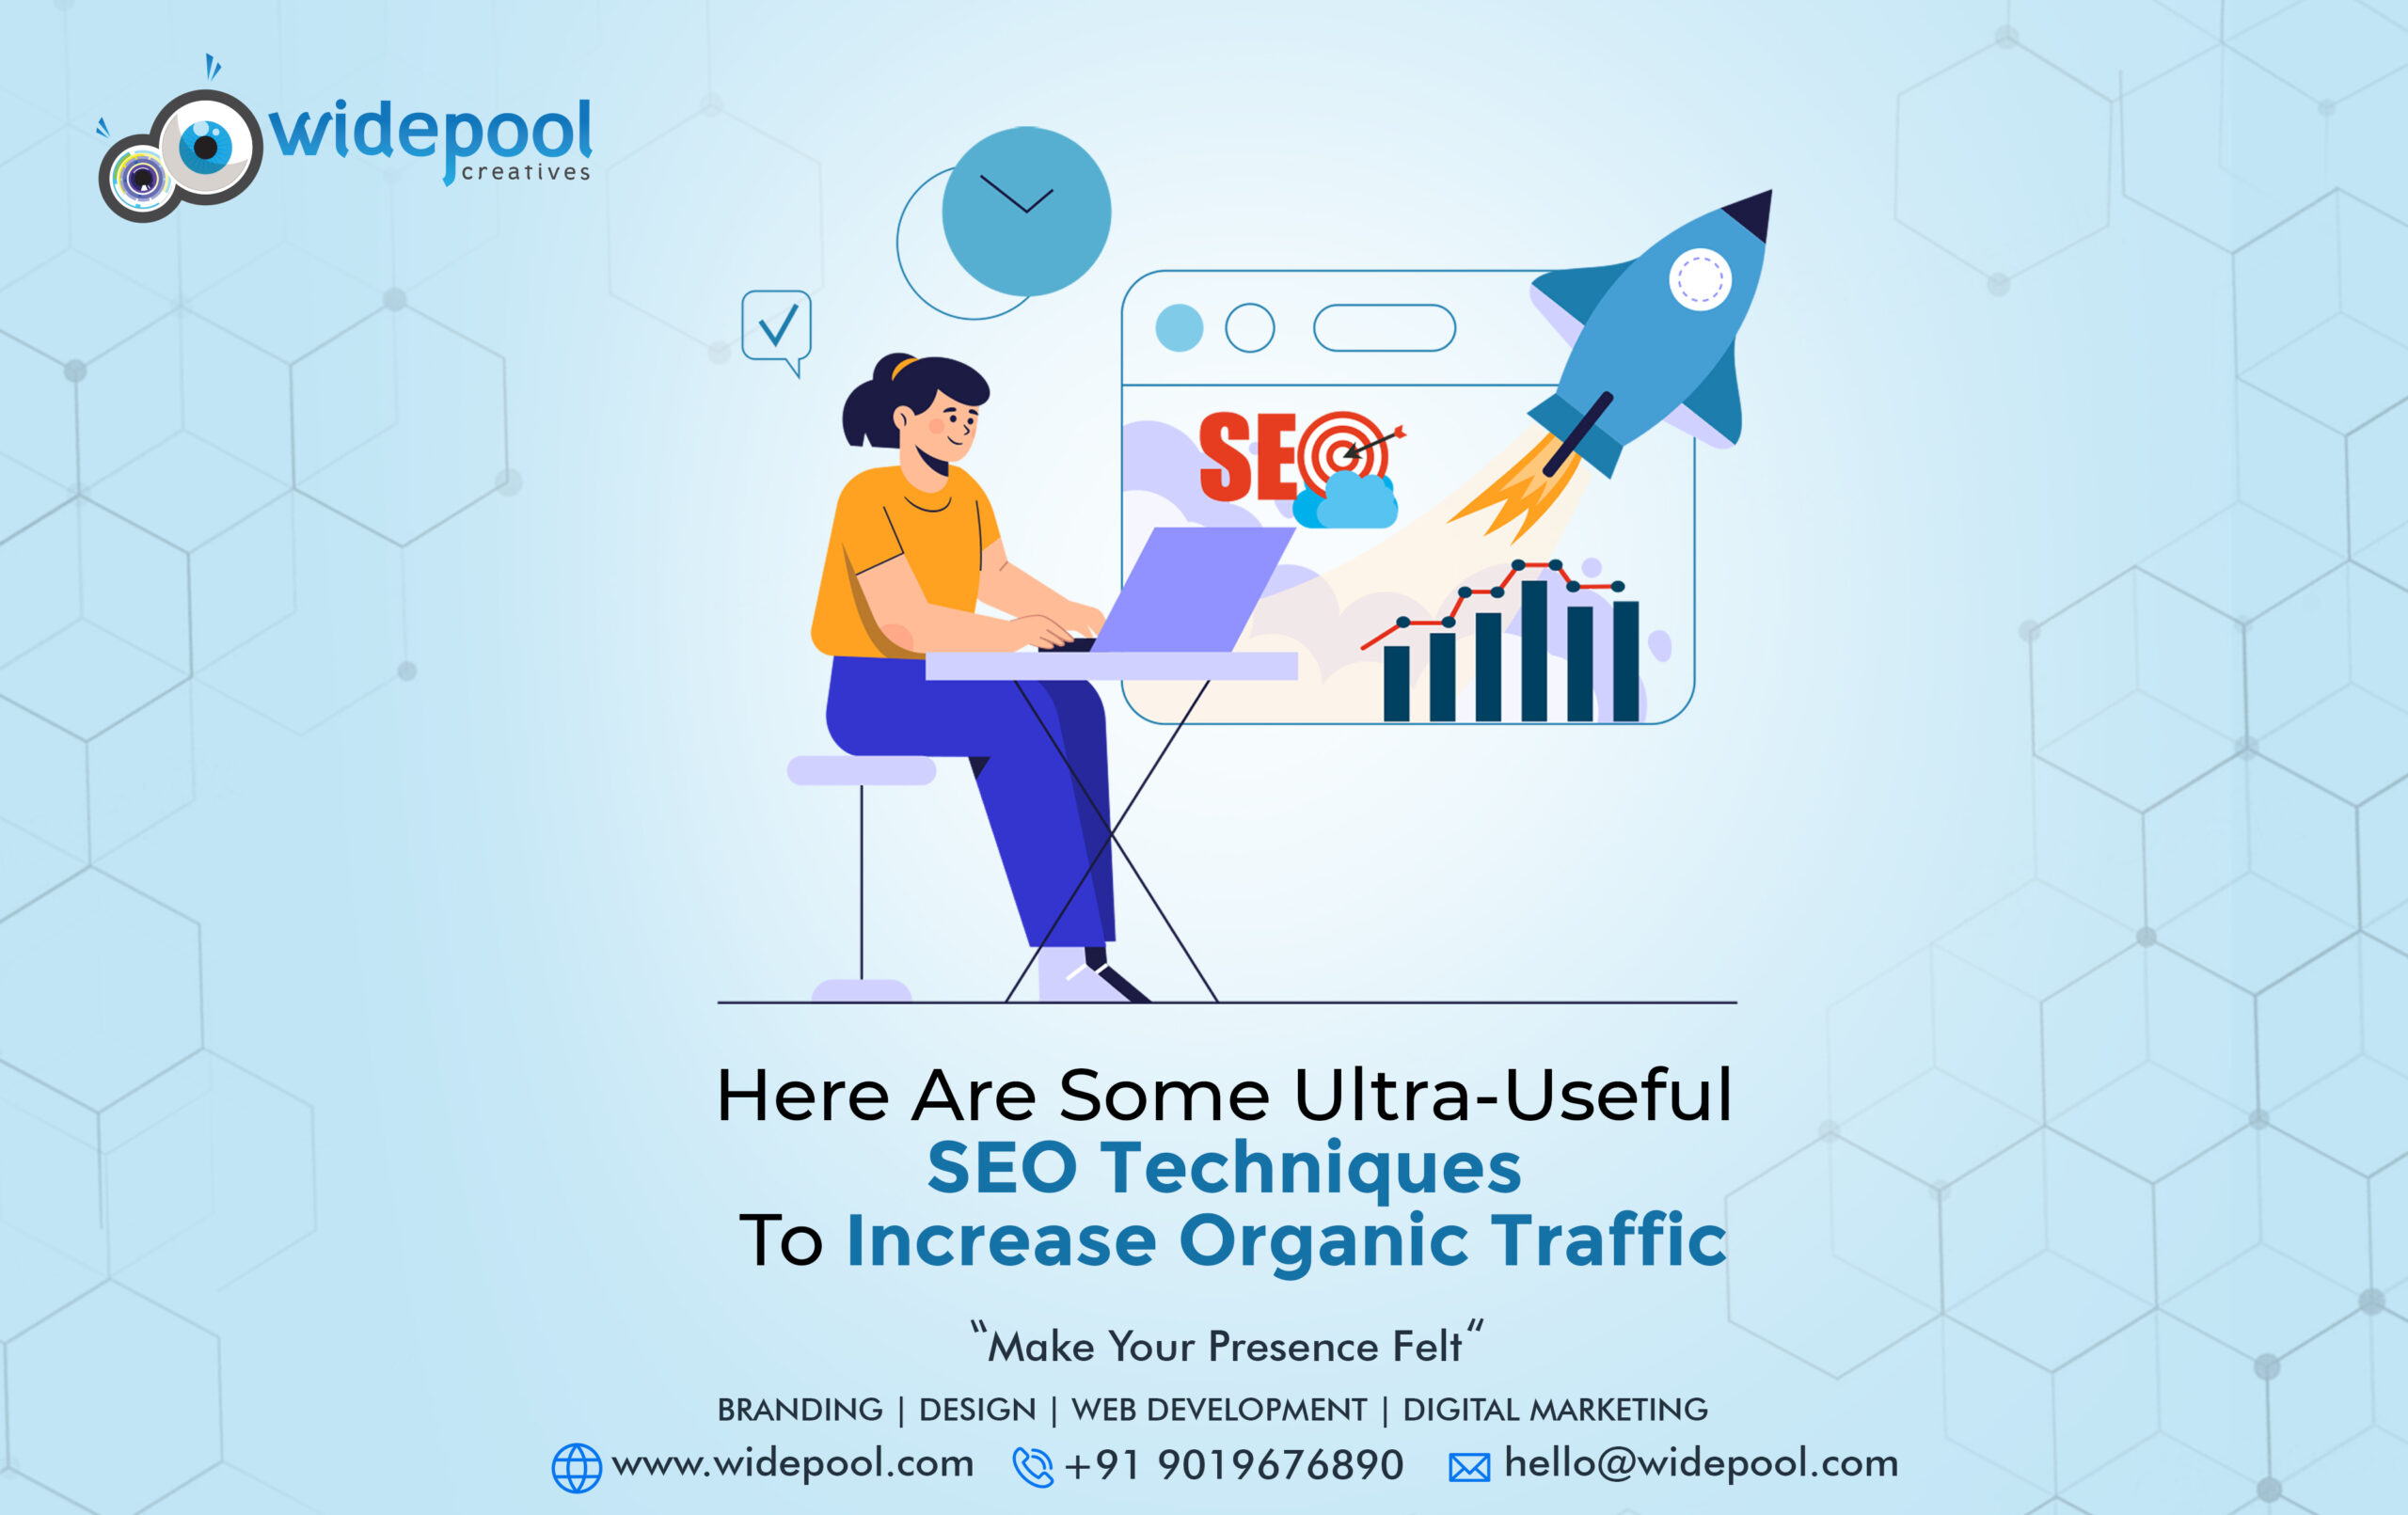 Here Are Some Ultra-Useful SEO Techniques to Increase Organic Traffic